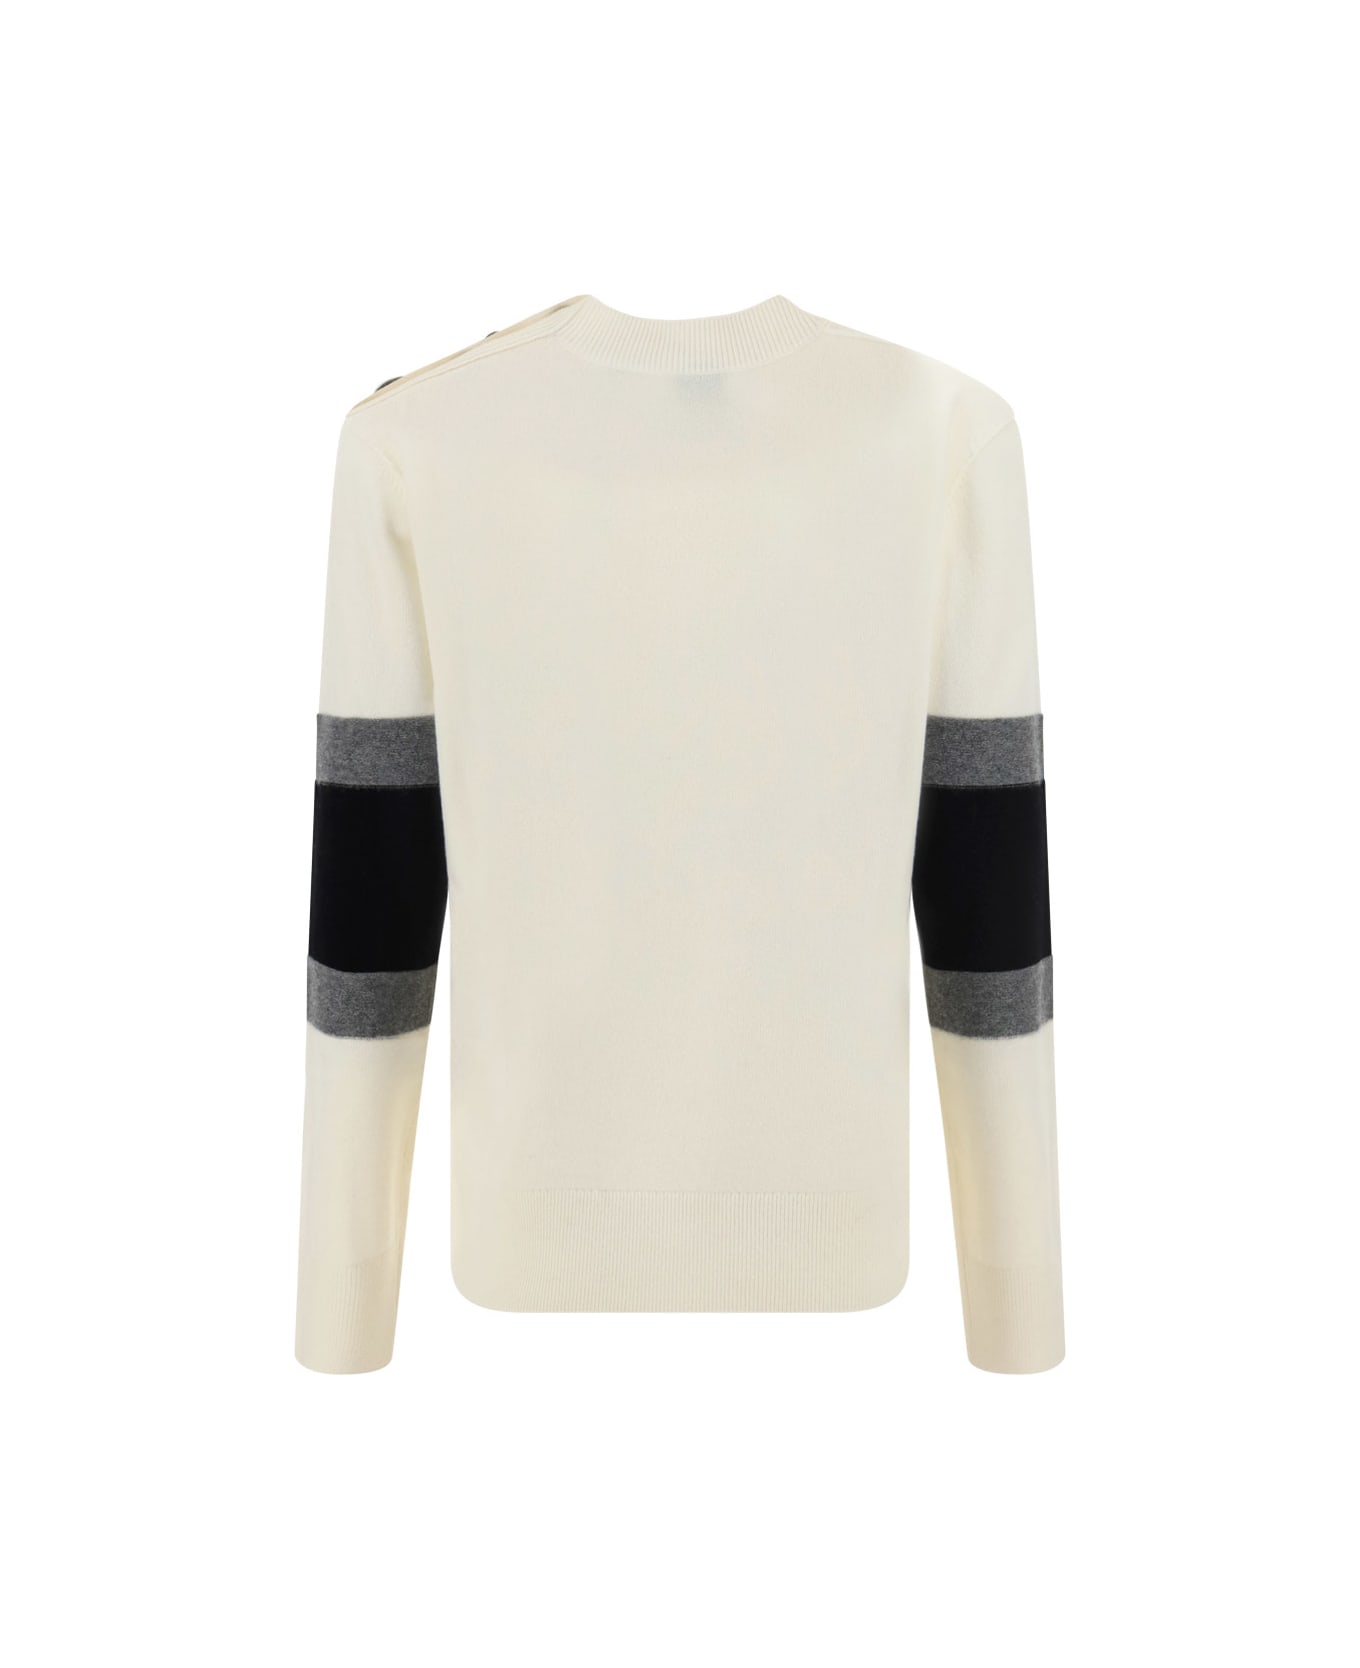 Burberry Hadley Sweater - Natural White